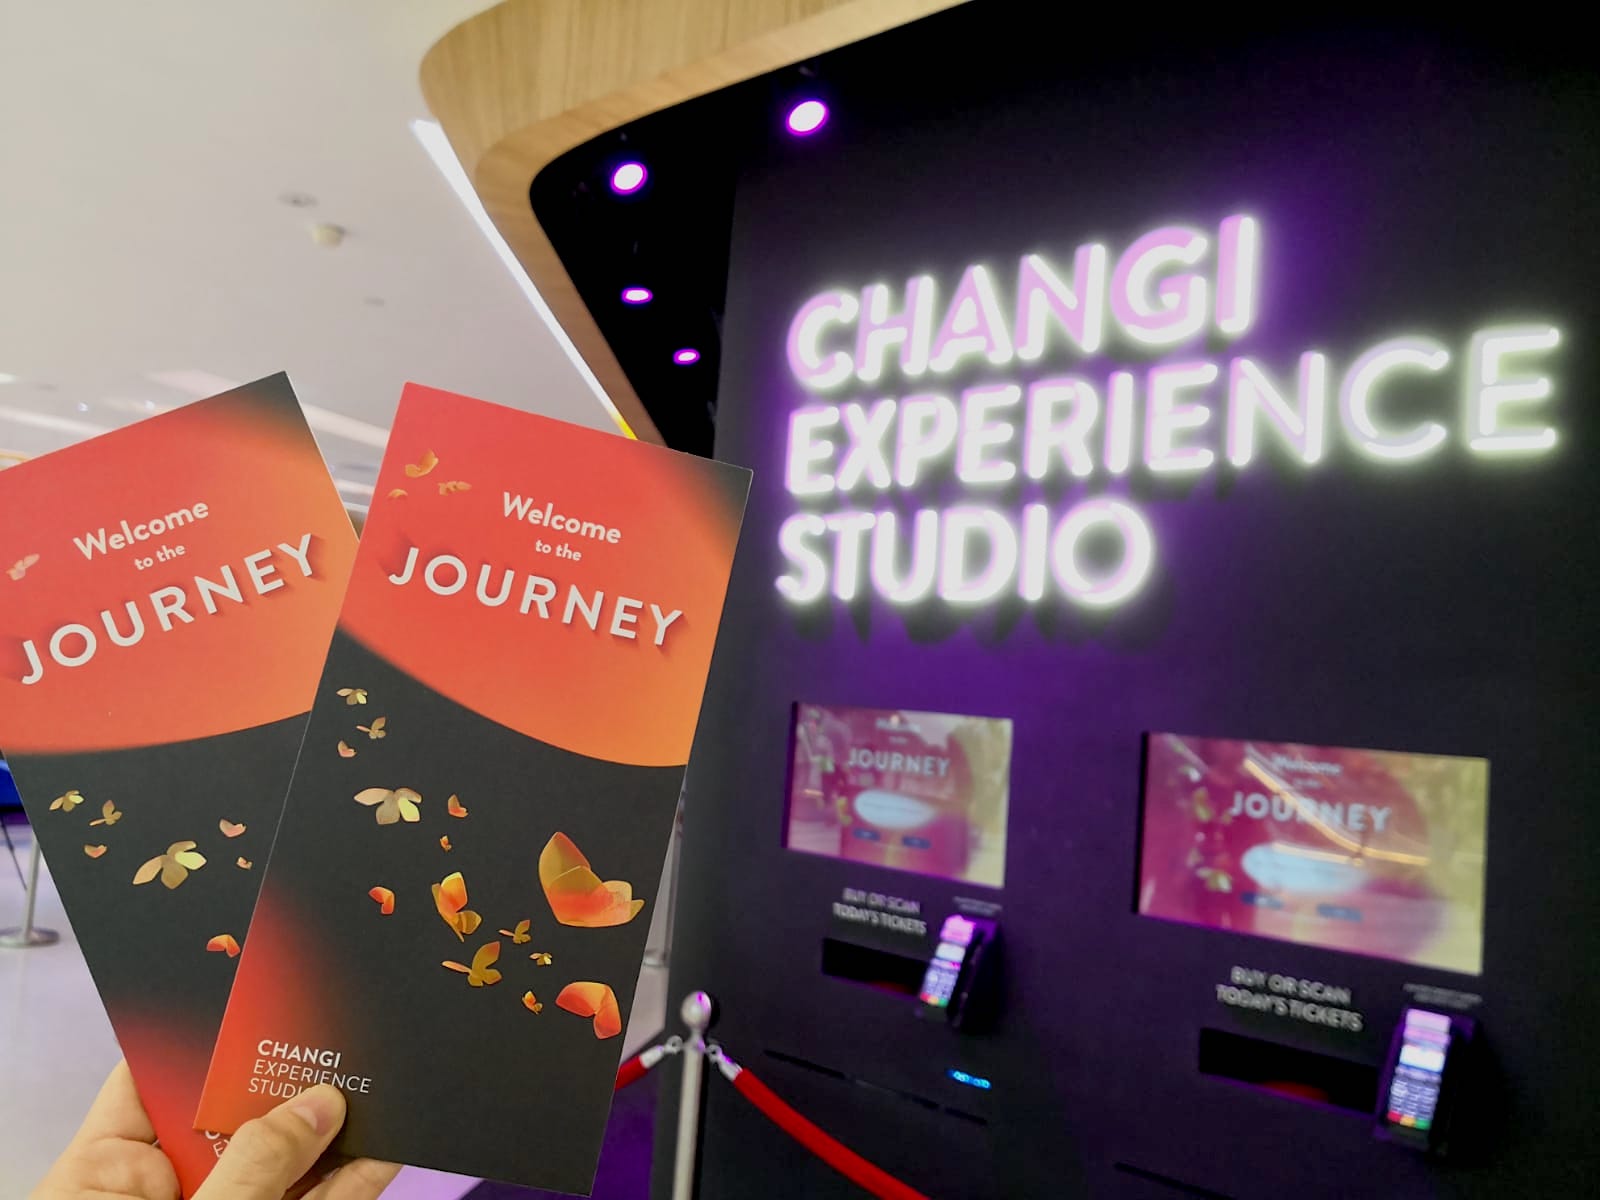 The Travel Guide used at the Changi Experience Studio